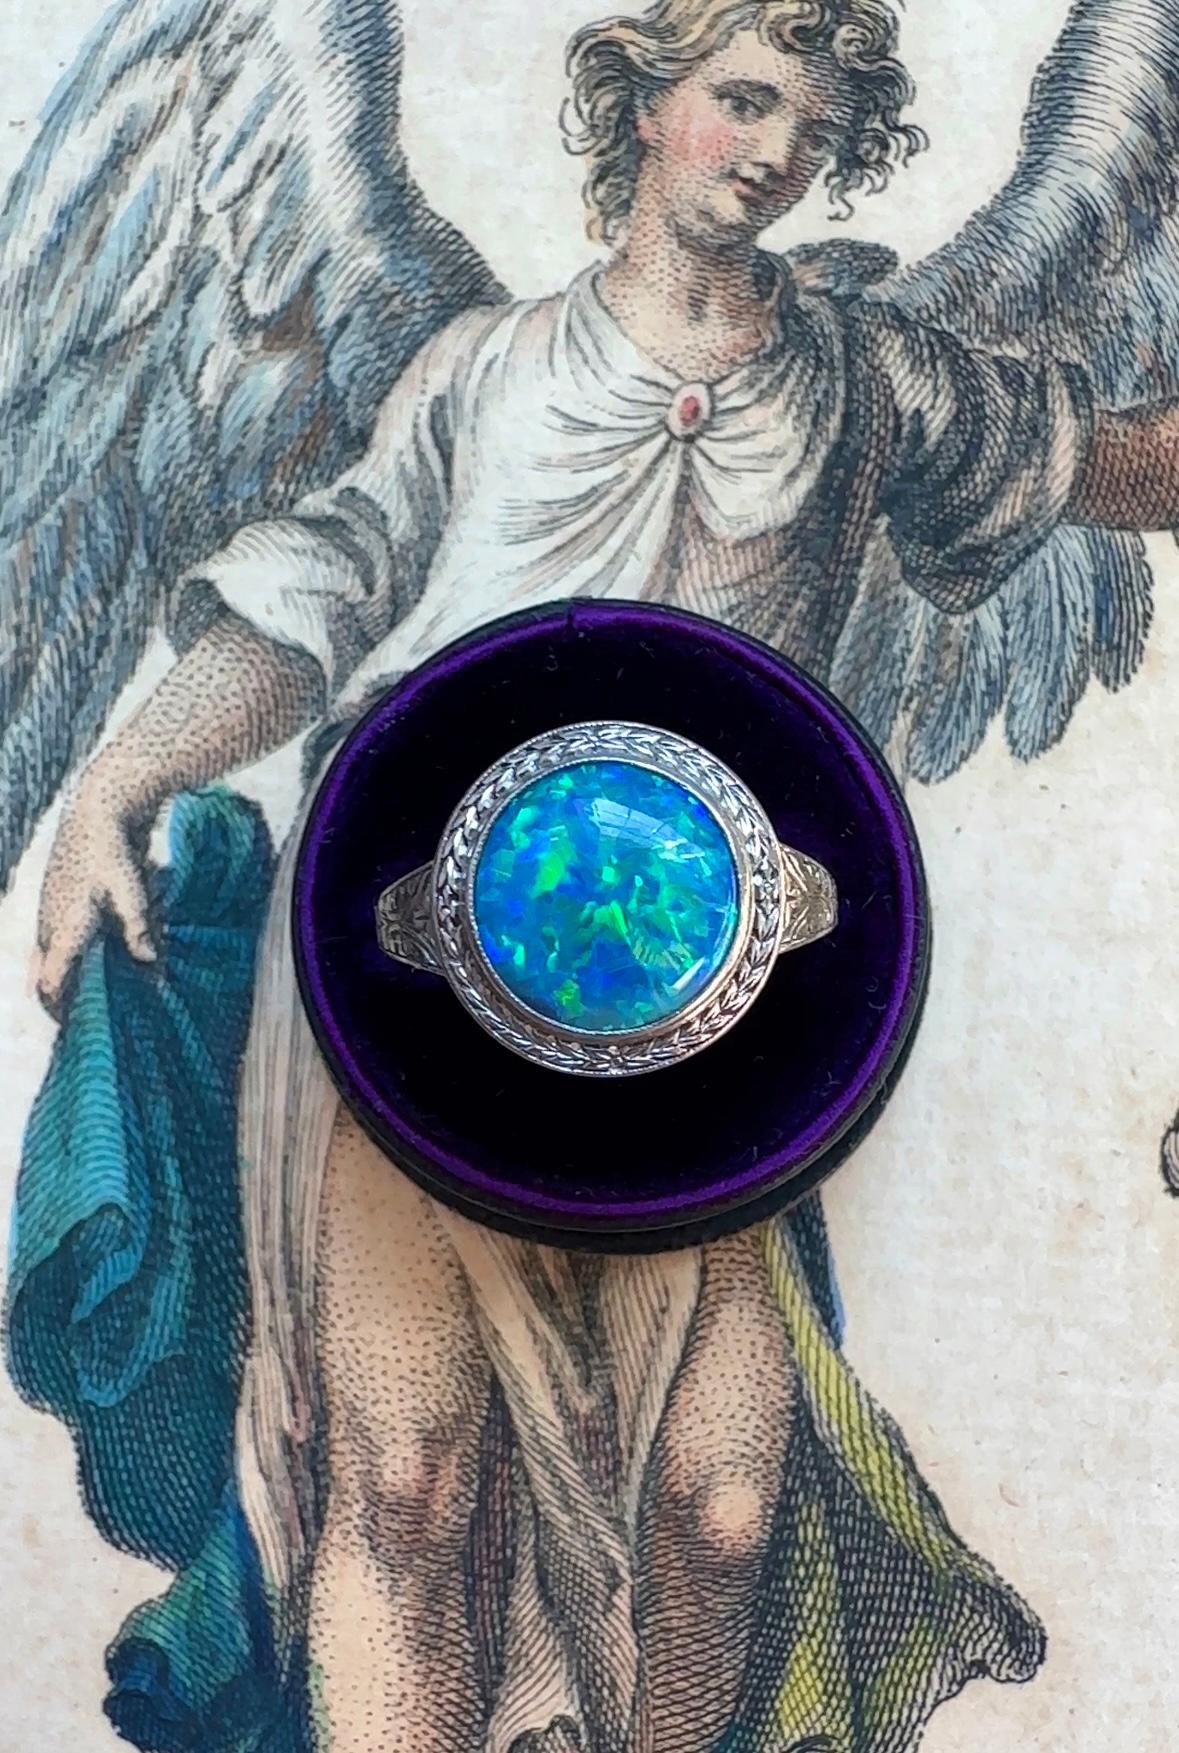 Like seeing the Earth from outer space, this mesmerizing black opal cabochon is filled with iridescent blues, Sunkist orange and neon greens. Masterfully hand fabricated in 18K white gold, the opal is framed by a hand engraved bezel displaying a